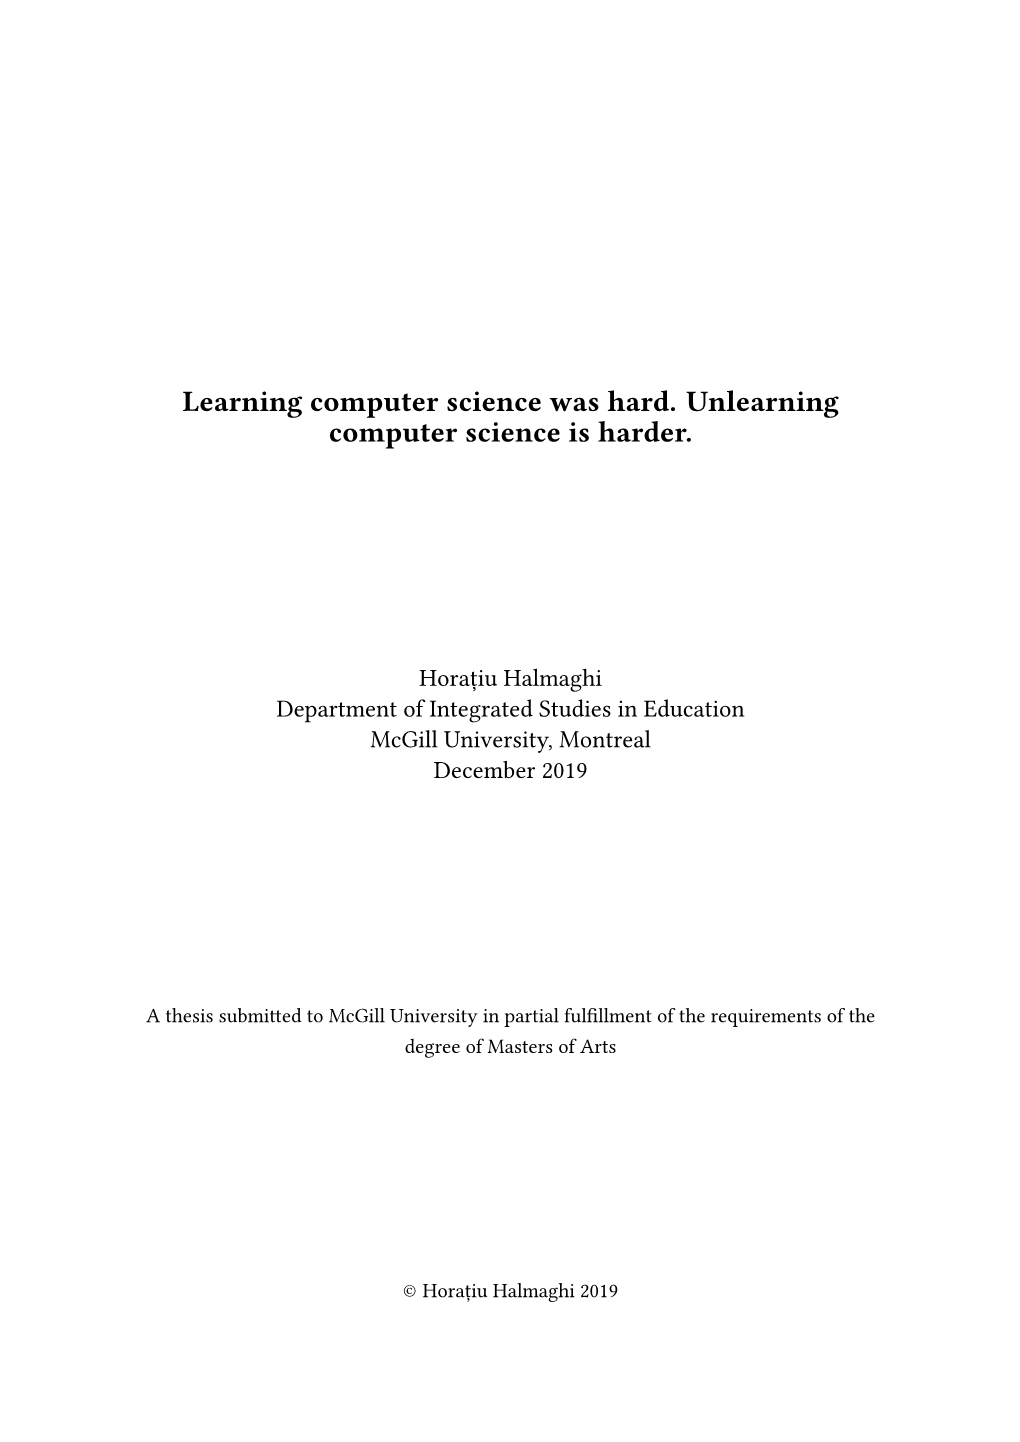 Learning Computer Science Was Hard. Unlearning Computer Science Is Harder